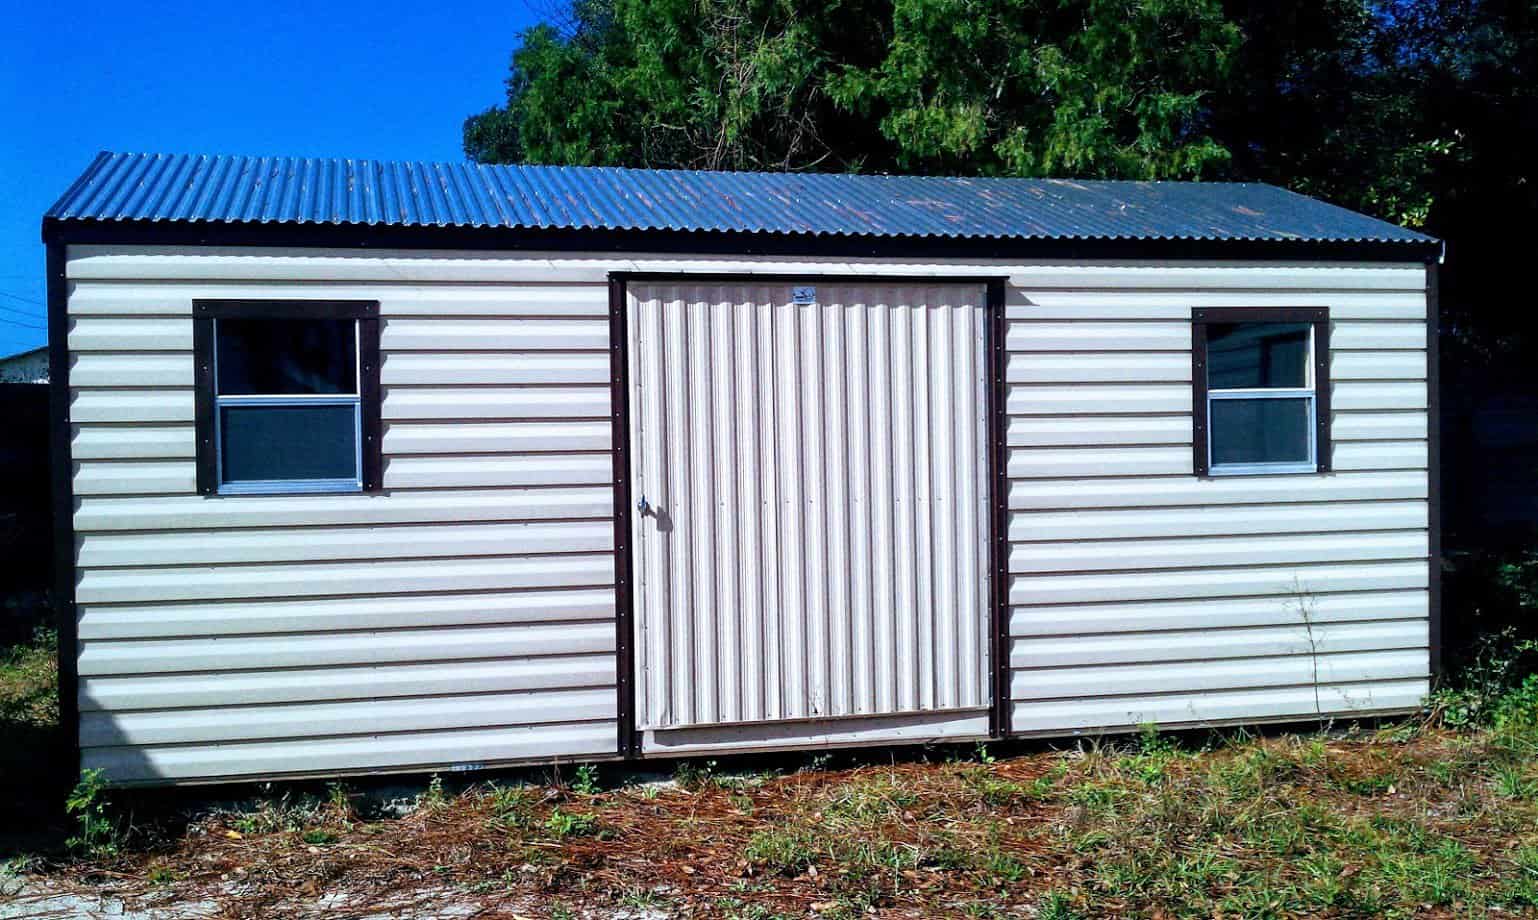 Probuilt Structures Steel Building Storage Building Sheds She Sheds Man Cave Logo sheds for sale dunnellon homosassa crystal river ocala lecanto inverness hernando marion citrus Probuilt Structures Steel Building Storage Building Sheds She Sheds Man Cave Logo sheds for sale dunnellon homosassa crystal river ocala lecanto inverness hernando marion citrus diy shed americana ramps we move sheds do it your self shed financing purchasing options big shed small shed fancy shed gardening shed shed man cave craft room office school room green house screen room screen combo porch sliding glass door barn storage shed door window credit cards cash financing deliver sheds moves shed movers robin sheds best of the best zero nada nothing down permitting playsets rent to own color options